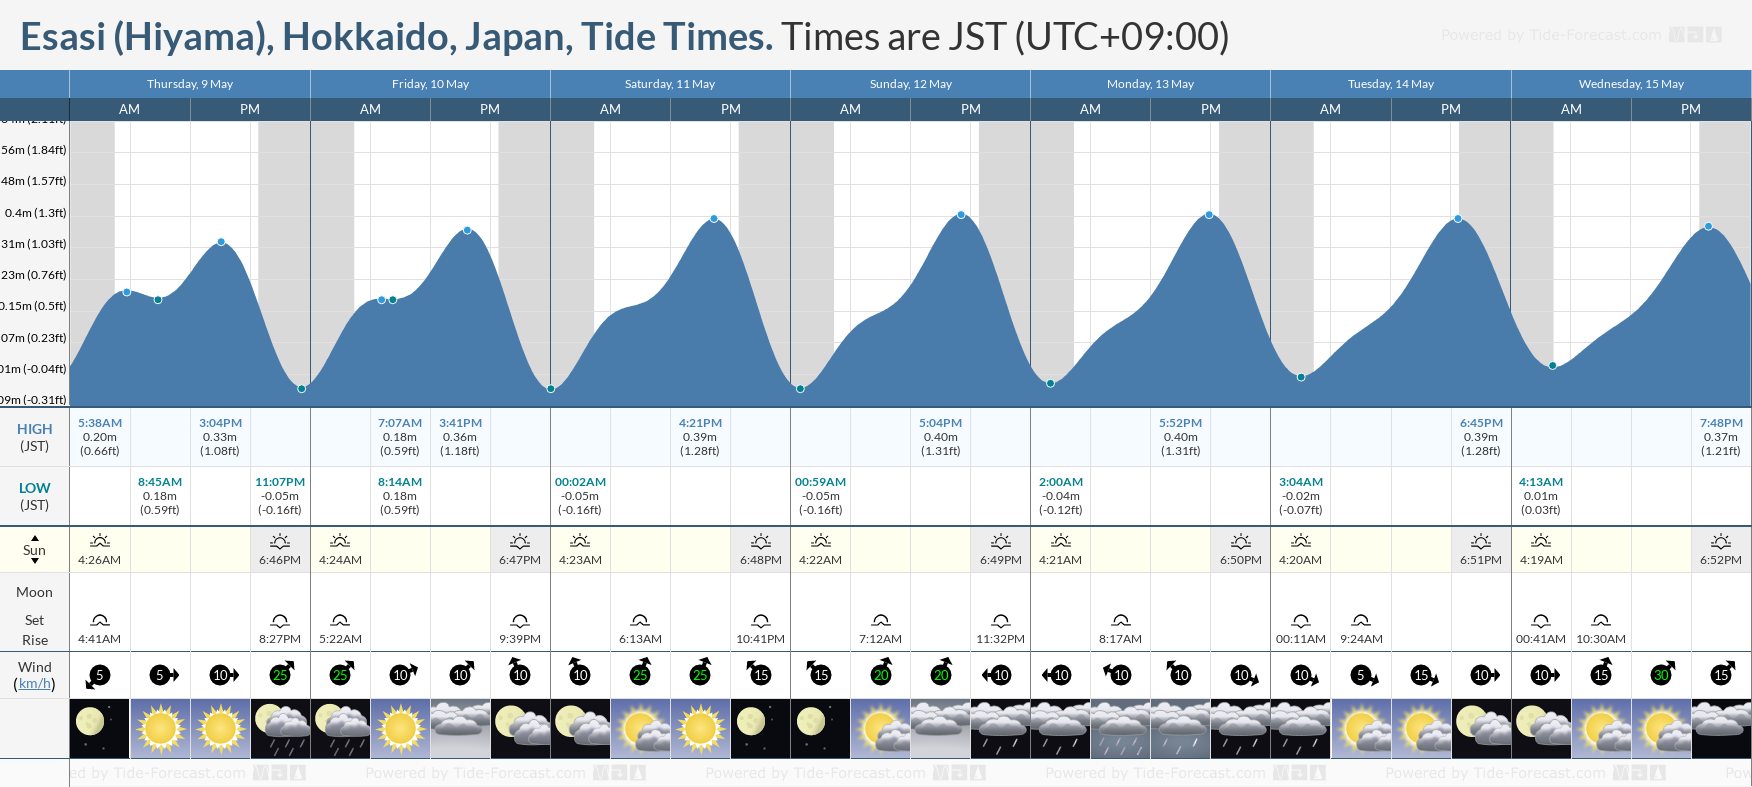 Esasi (Hiyama), Hokkaido, Japan Tide Chart including high and low tide tide times for the next 7 days